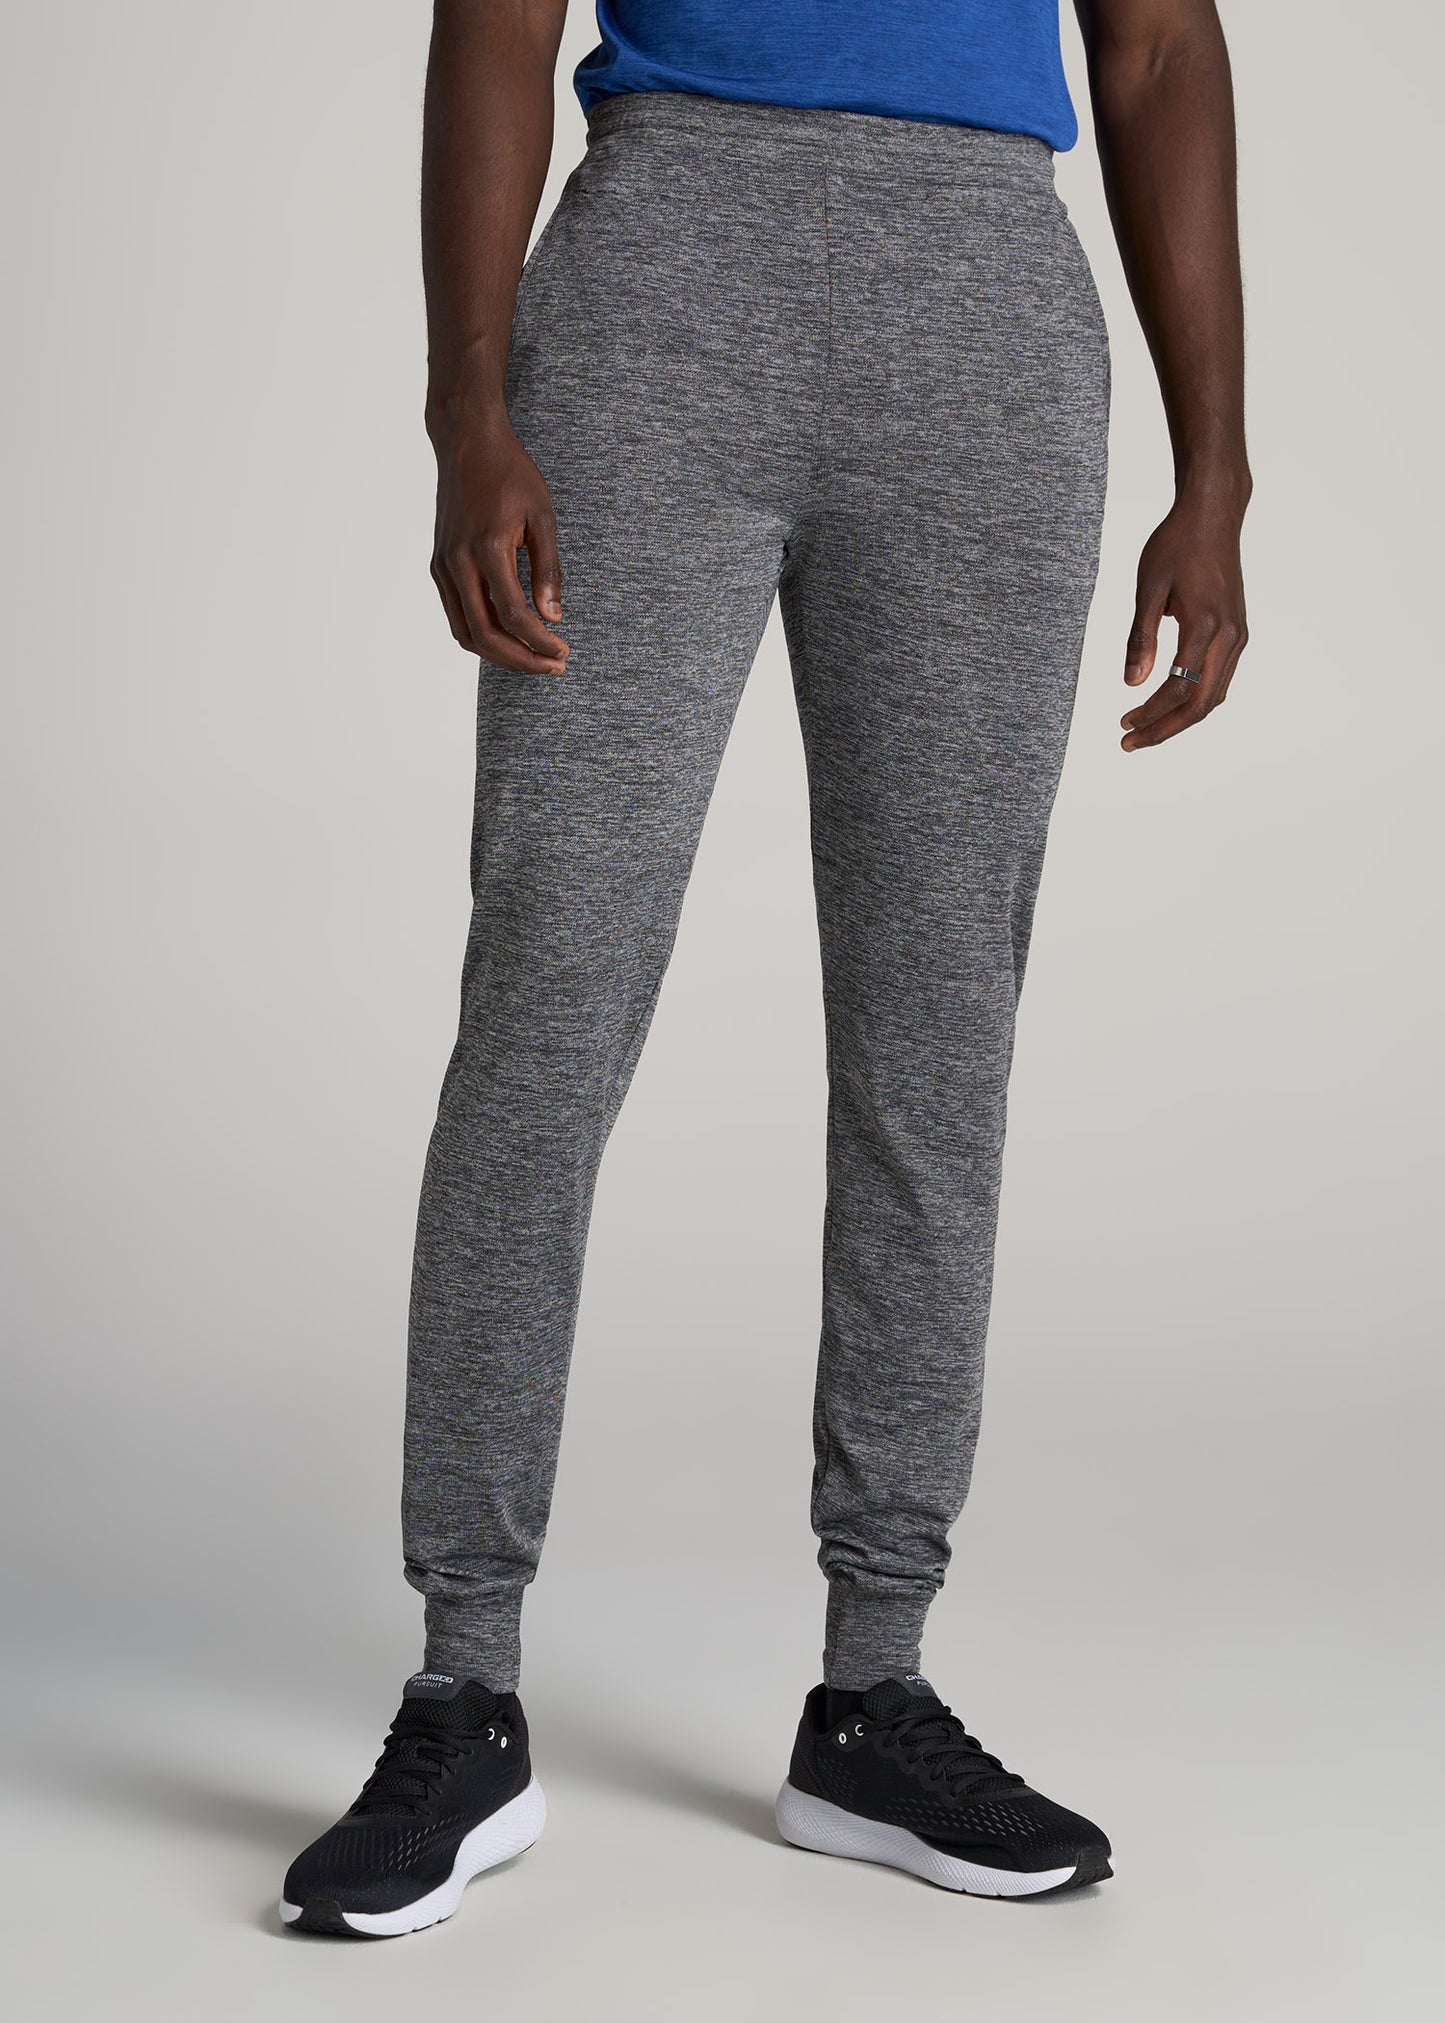 A.T. Performance Engineered Joggers for Tall Men in Grey Mix